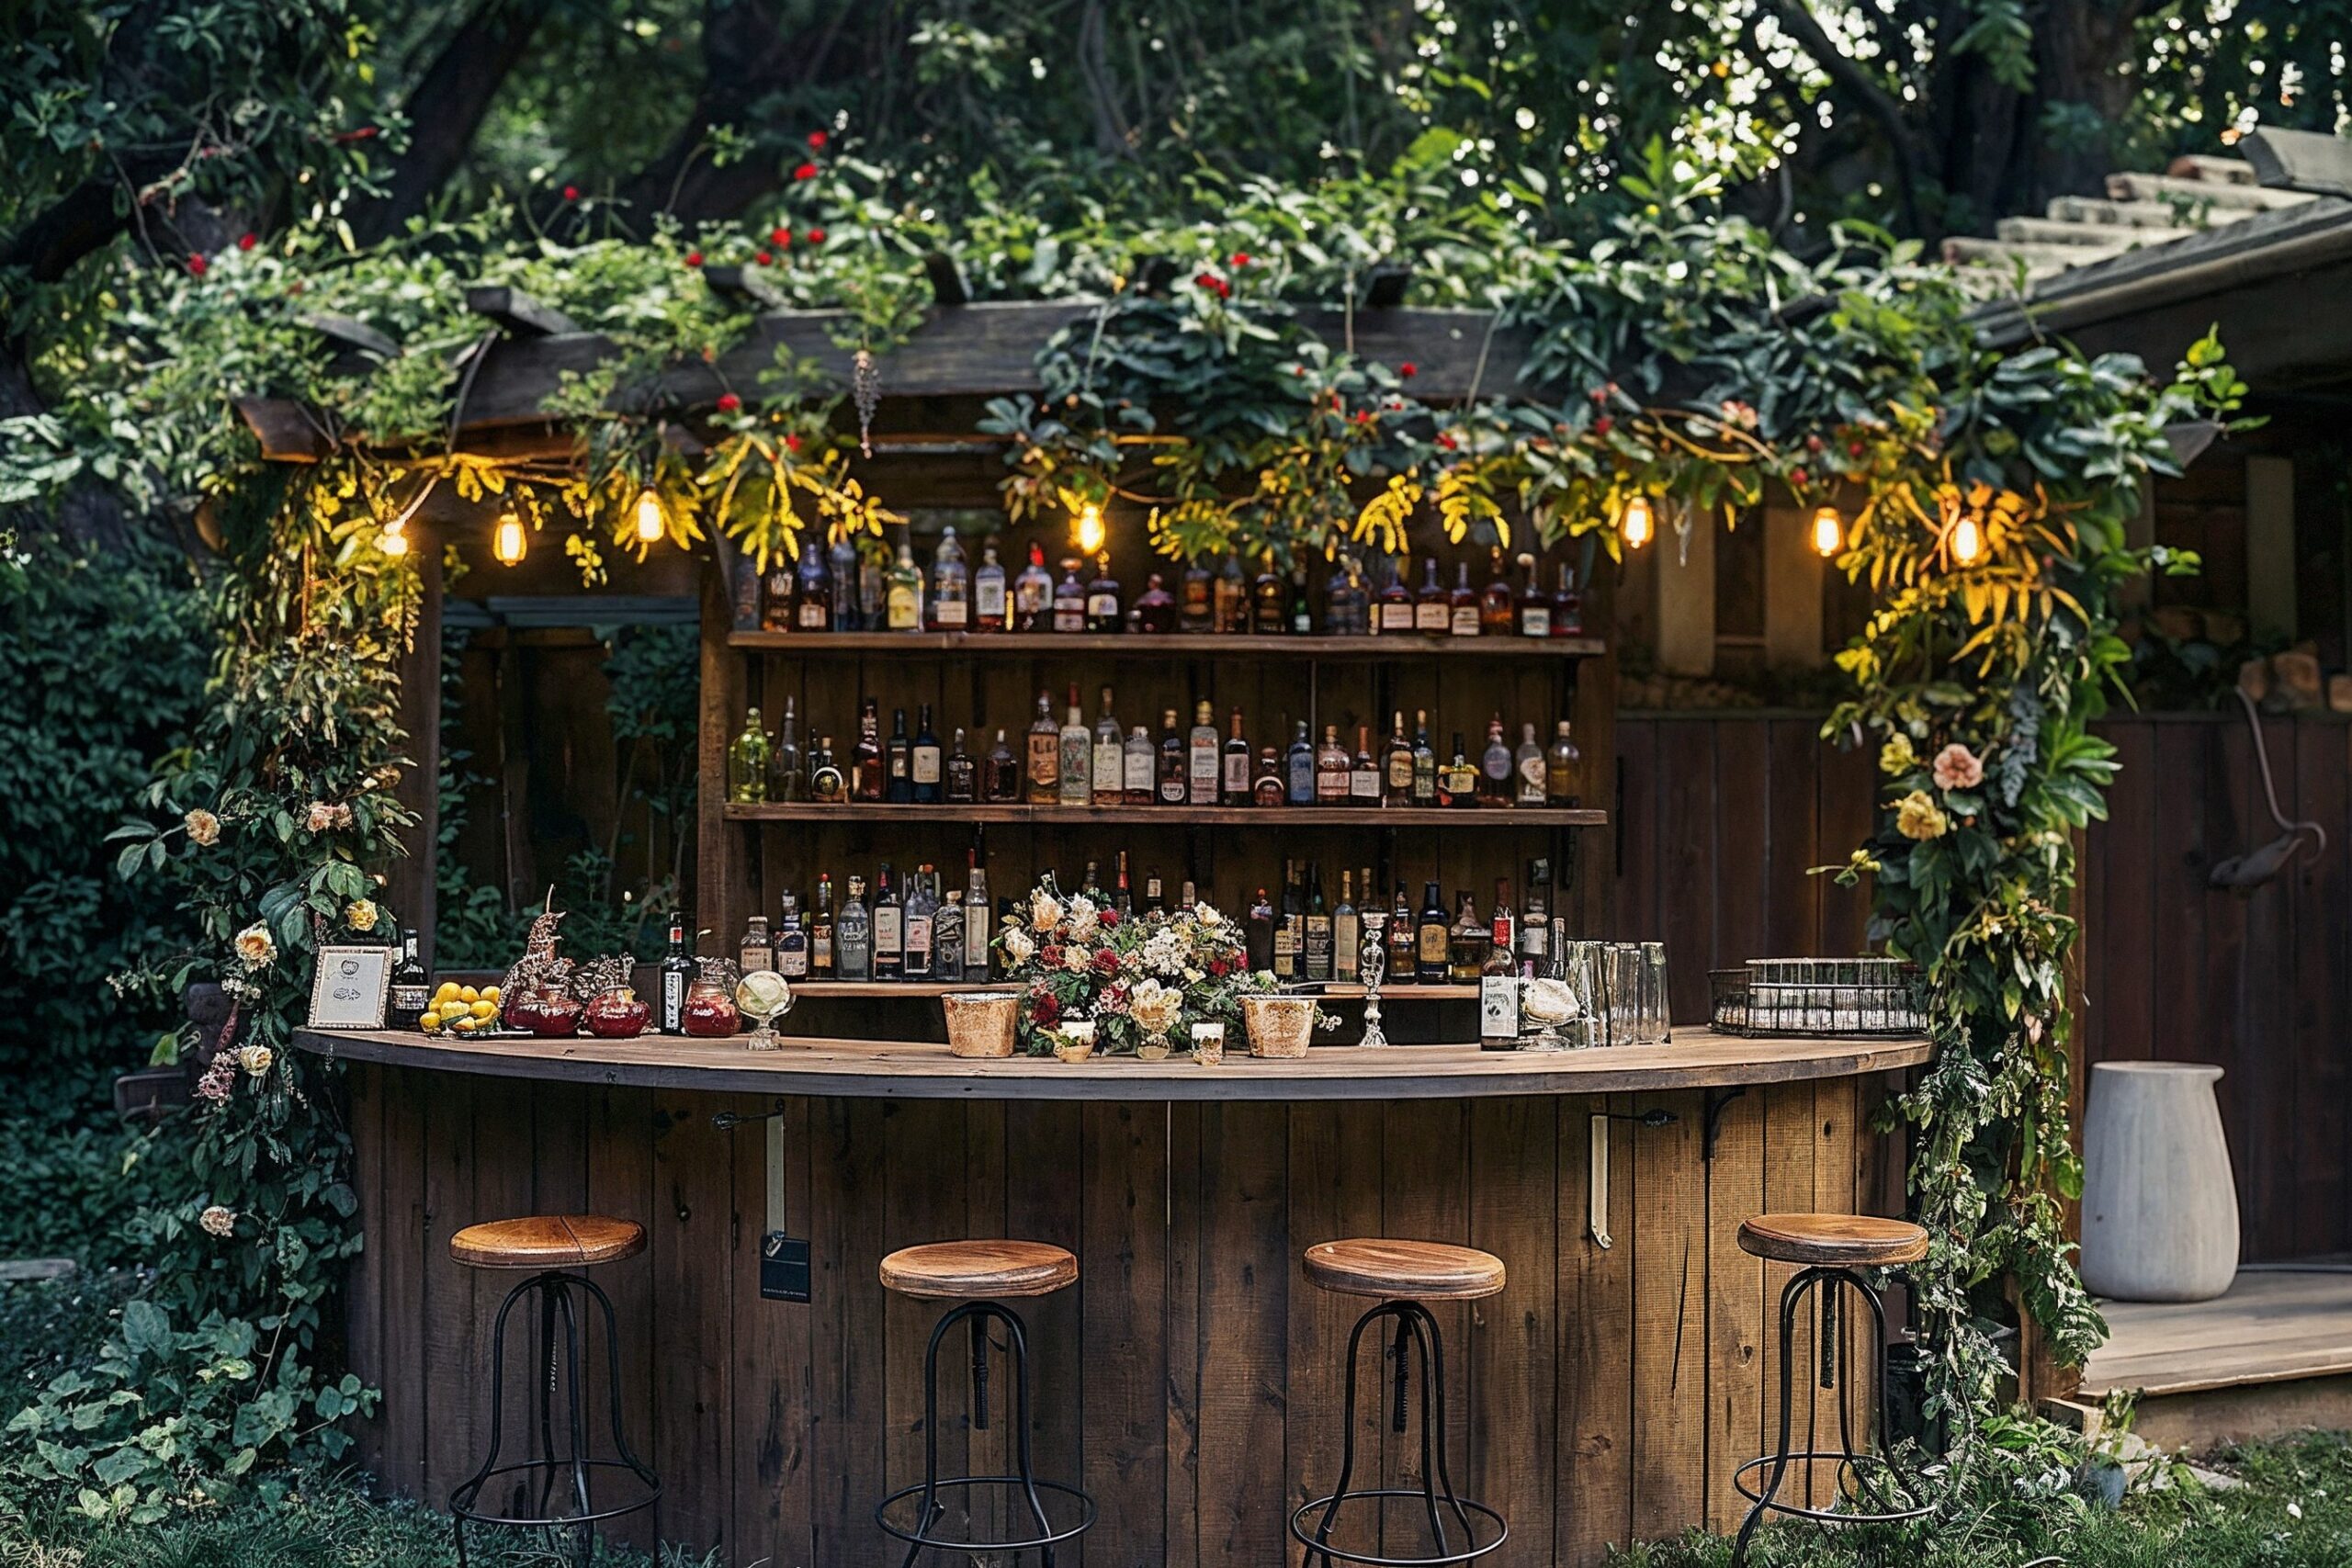 A rustic outdoor bar covered in lush greenery and flowers, with wooden stools and shelves displaying various bottles of liquor, set in a garden area.